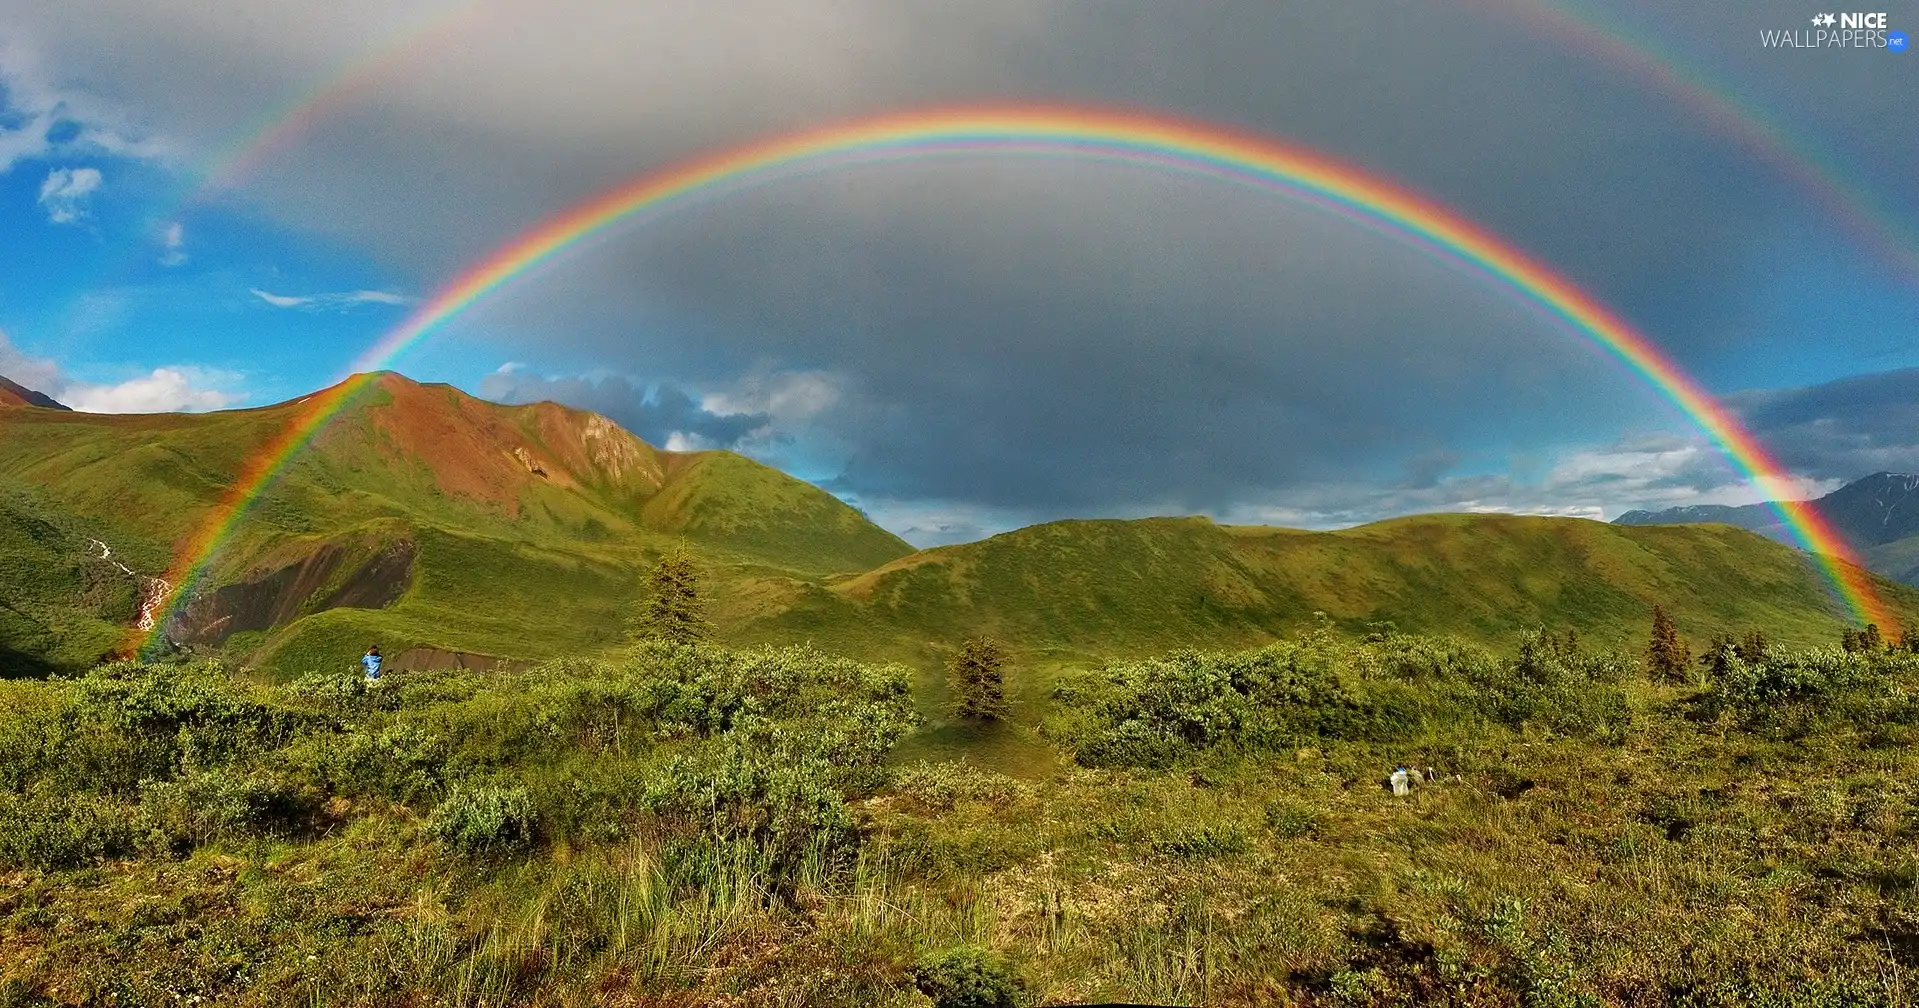 Double, Mountains, Sky, Great Rainbows